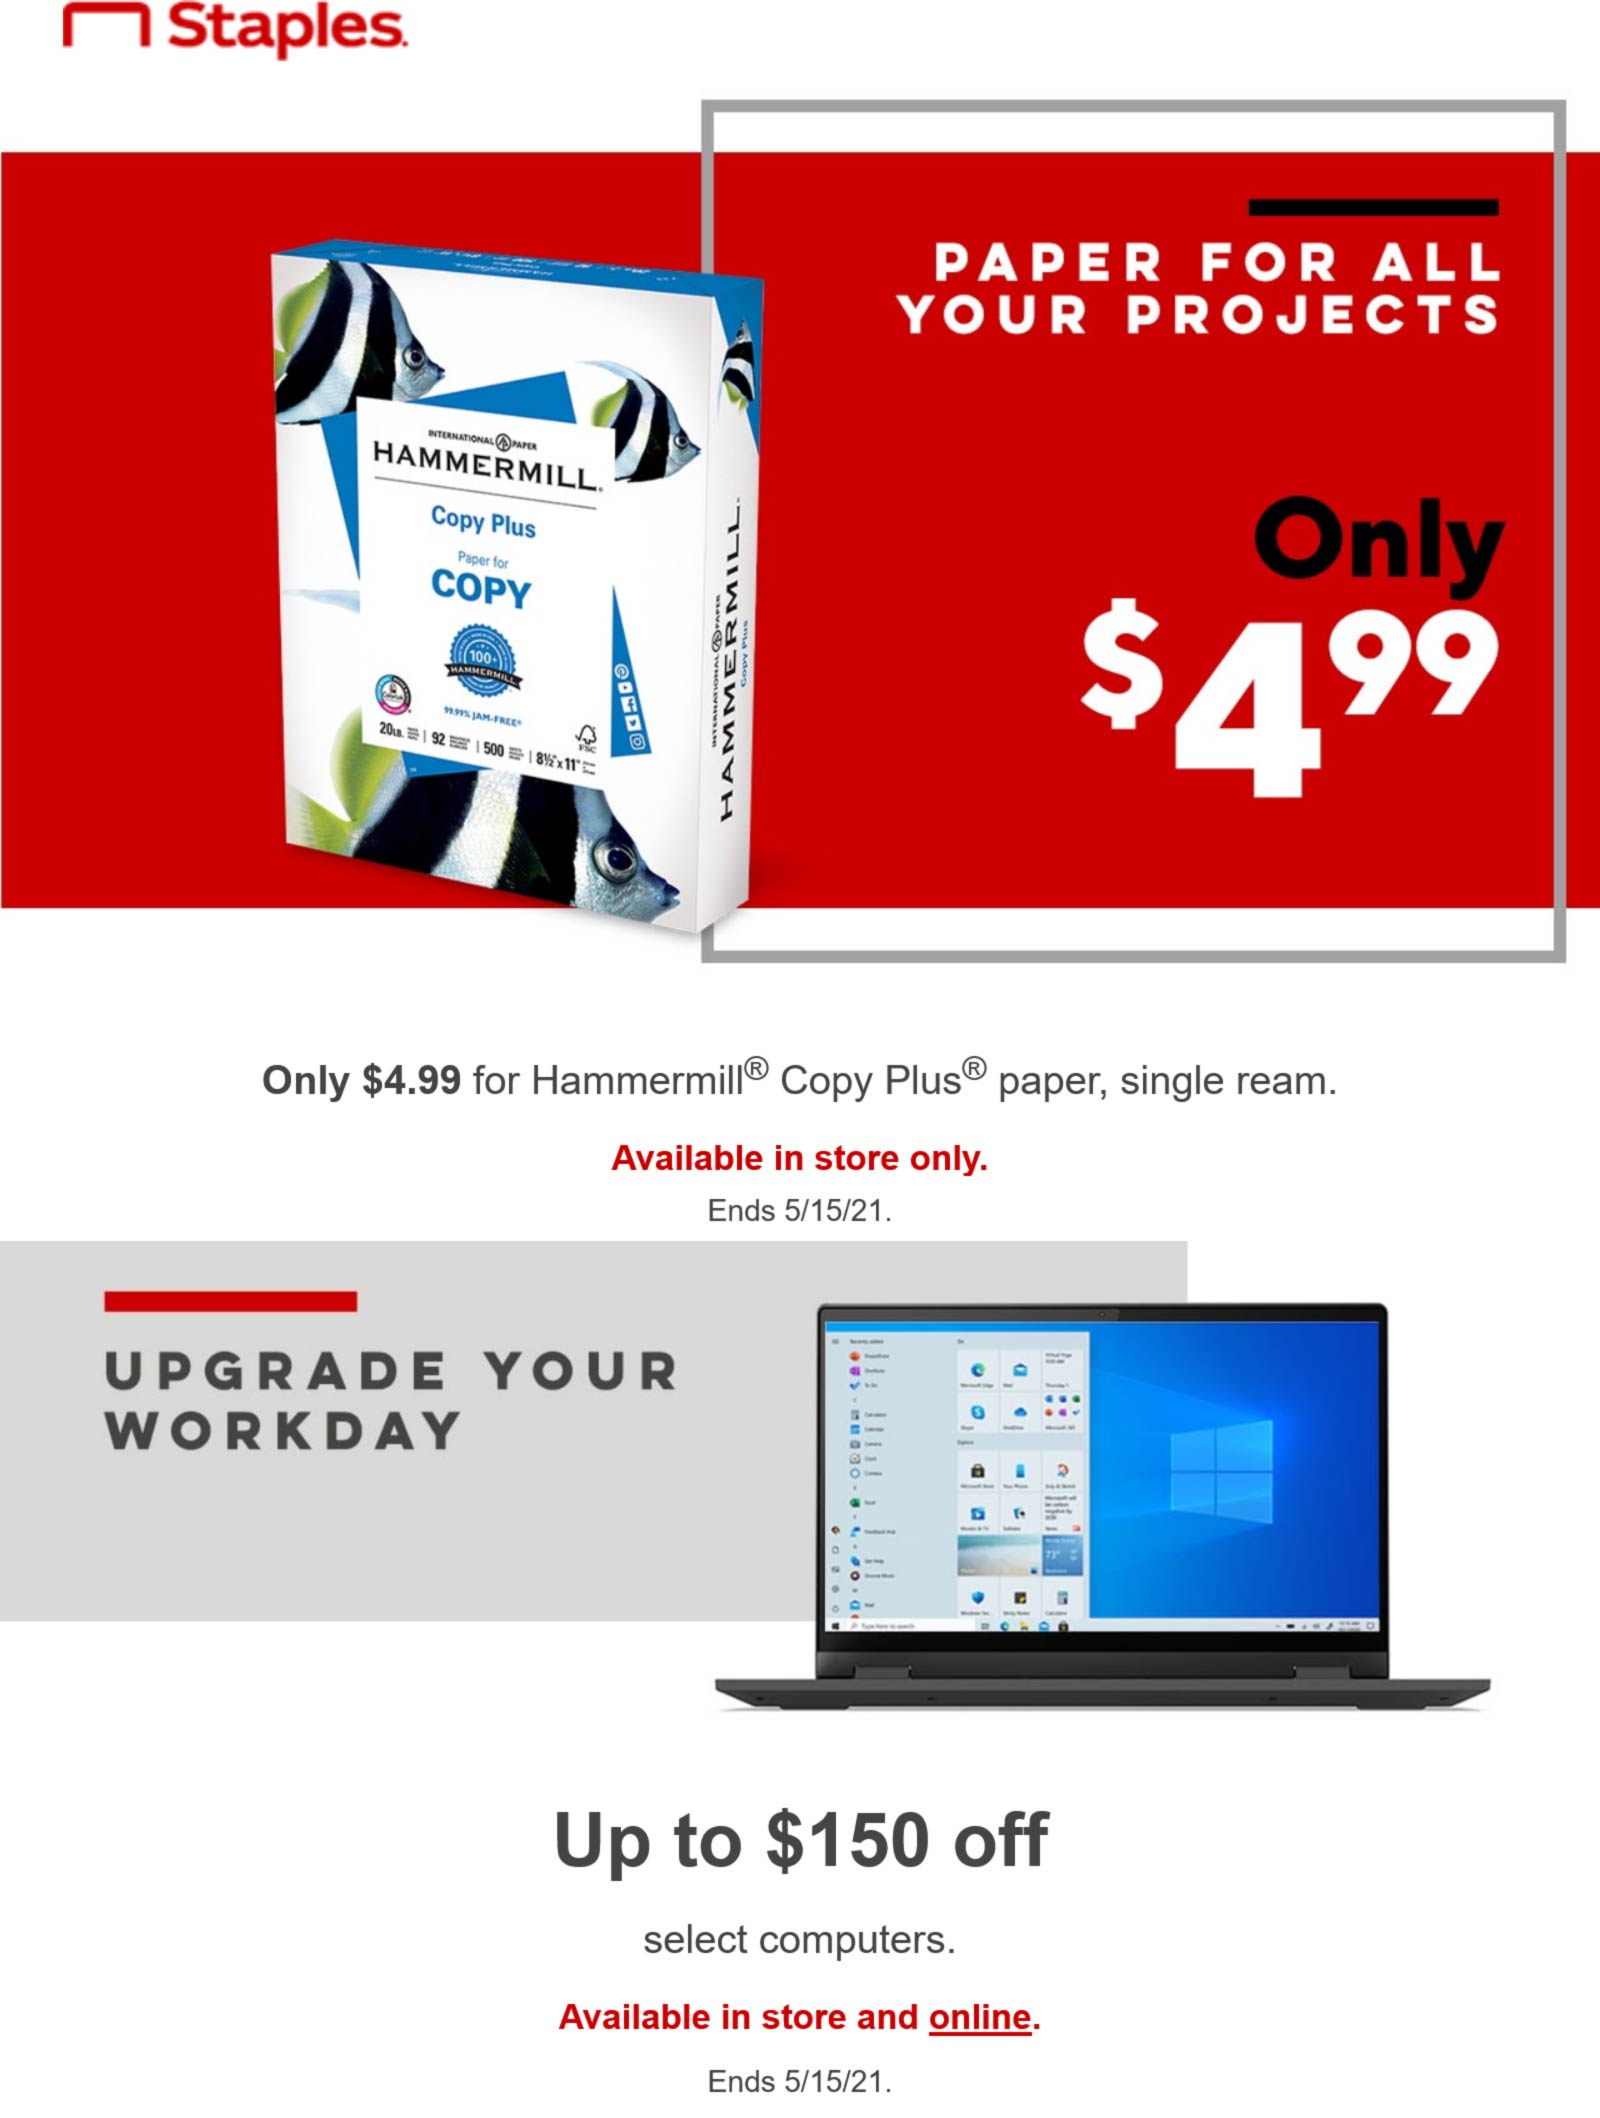 Staples stores Coupon  $5 paper reams at Staples #staples 